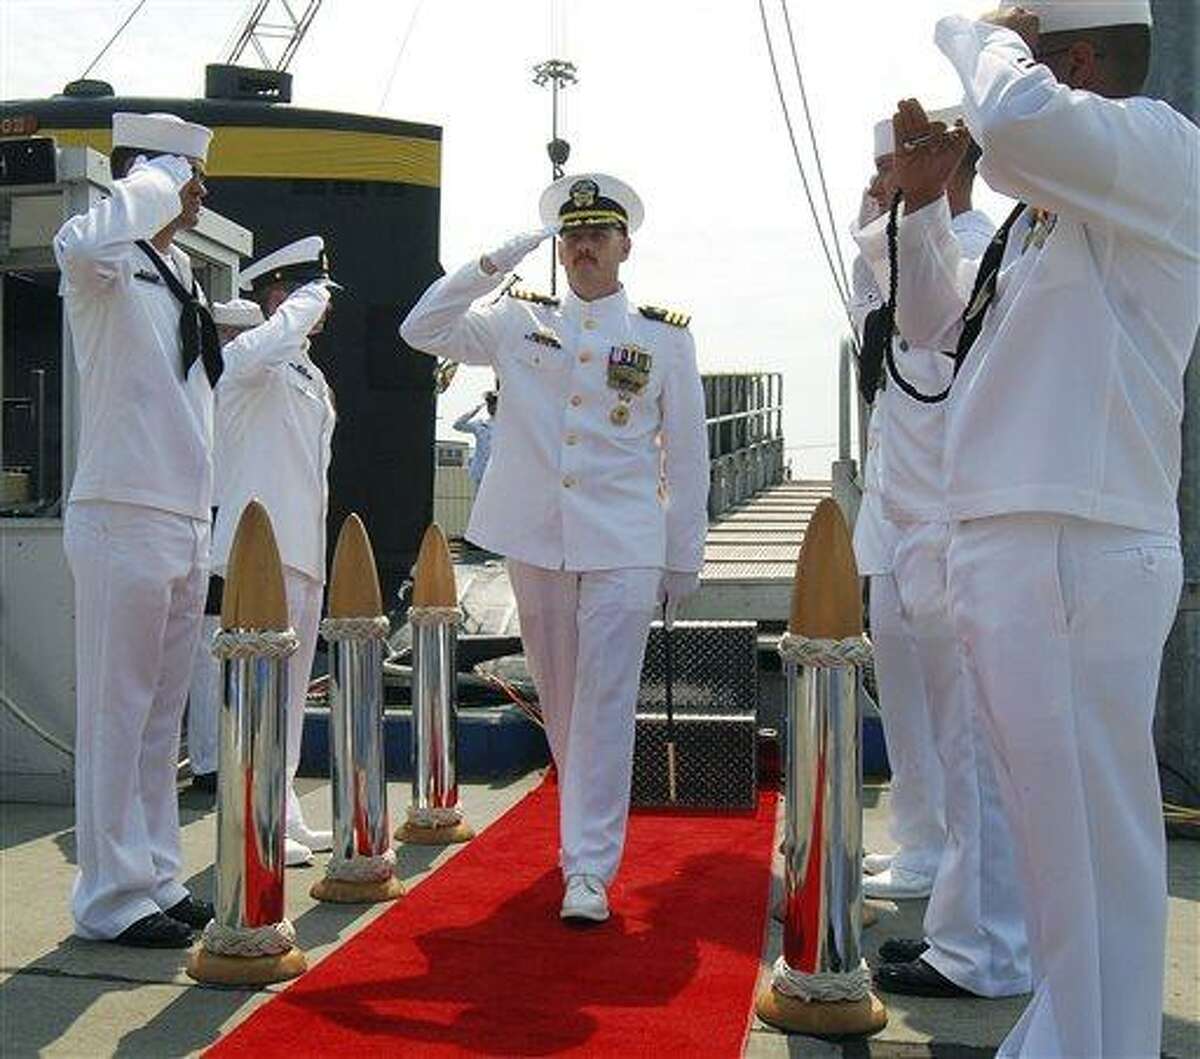 In this Aug. 3, 2012 photo provided by the U.S. Navy, Cmdr. Michael P. Ward II, center, is saluted during the change-of-command ceremony for the nuclear submarine USS Pittsburgh at the Naval Submarine Base New London, in Groton, Conn. Ward was relieved of his command in August 2012 after he faked his own death to end an affair with a woman. Ward's lawyer said Friday, April 12, 2013, during a hearing in Groton to determine his status with the Navy, that Ward admits to the mistake and apologizes, and that he should not be expelled from the Navy. (AP Photo/U.S. Navy, Jason J. Perry )